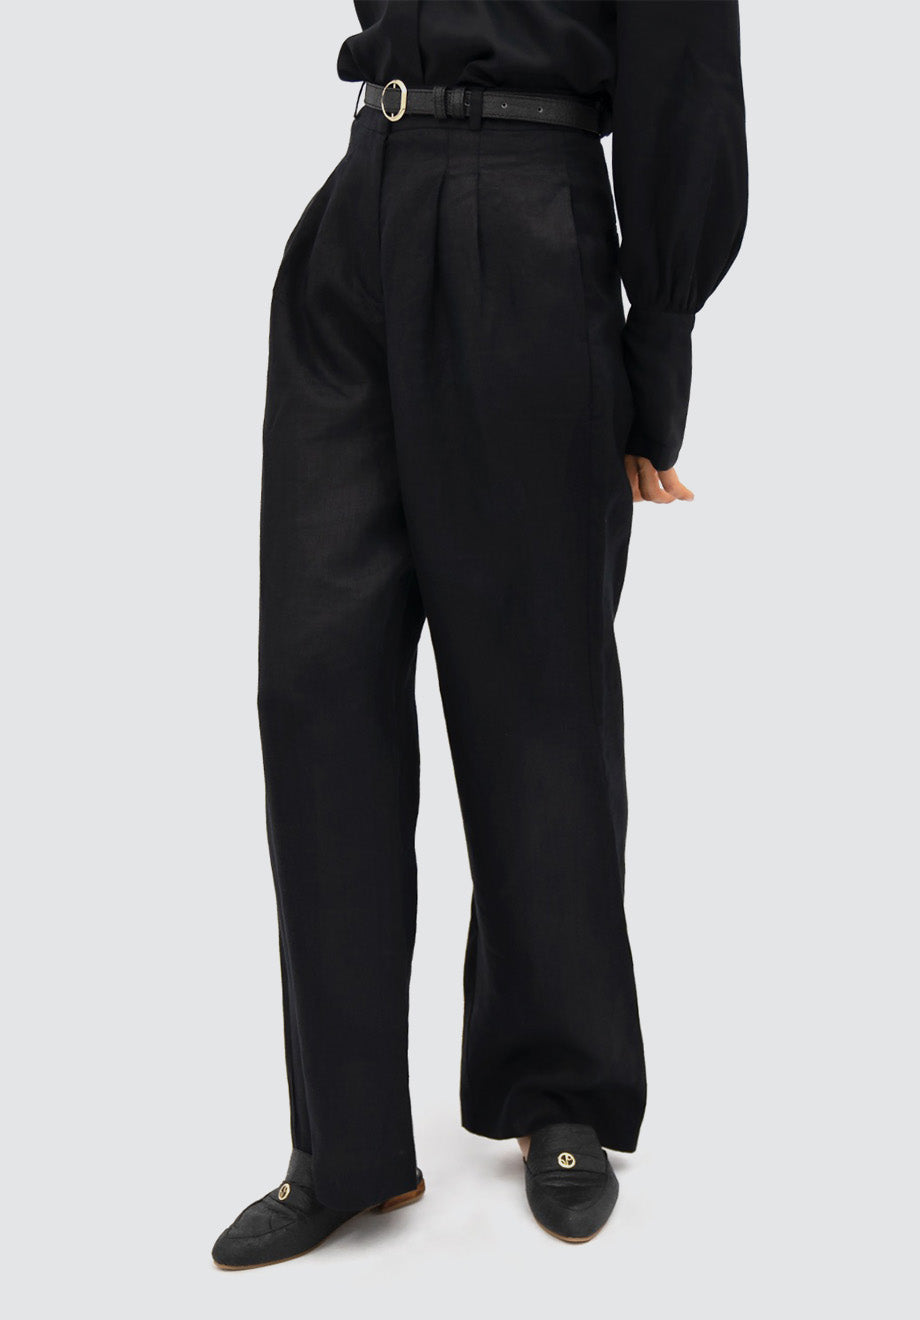 French Riviera NCE - Wide Leg Pants | Licorice